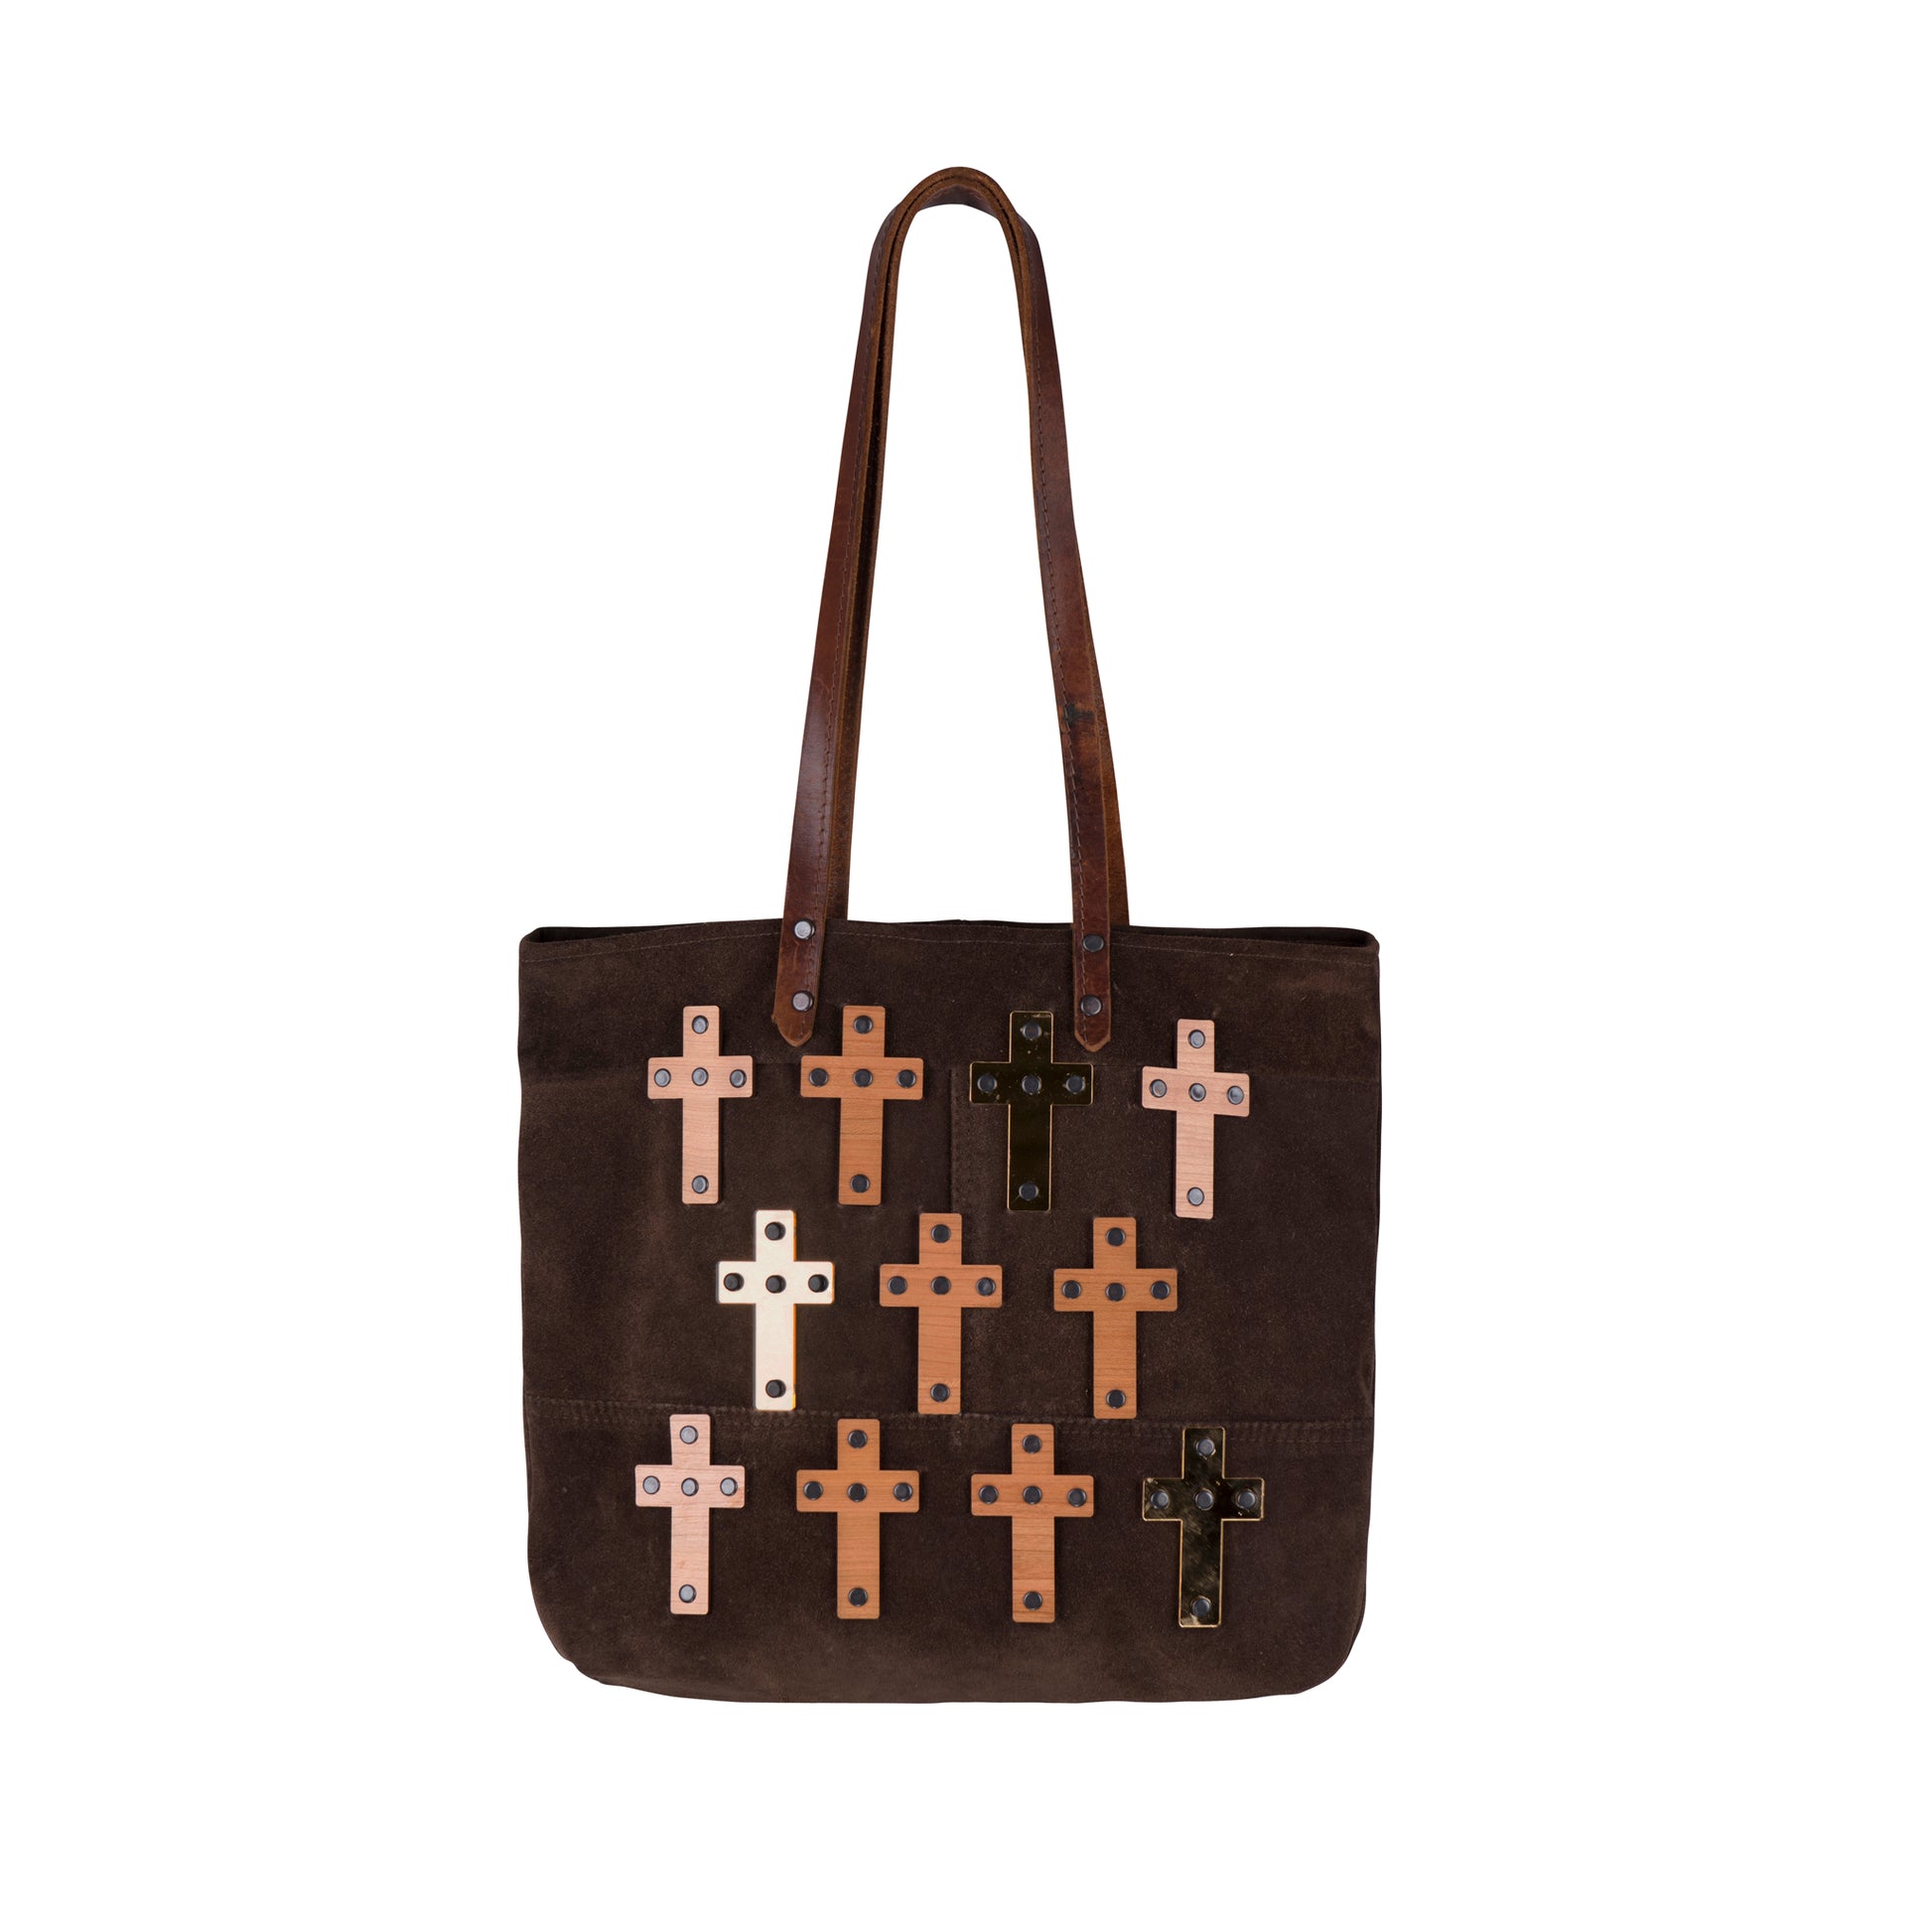 METANoIA The Cross Medium Bag inside featuring pinstripe fabric sourced from recycled fabric and a caramel leather woven label lasered with the iconic METANoIA label.METANoIA The Cross Chocolate recycled leather medium handbag with cross shaped bamboo, walnut and metallic acrylic forms.